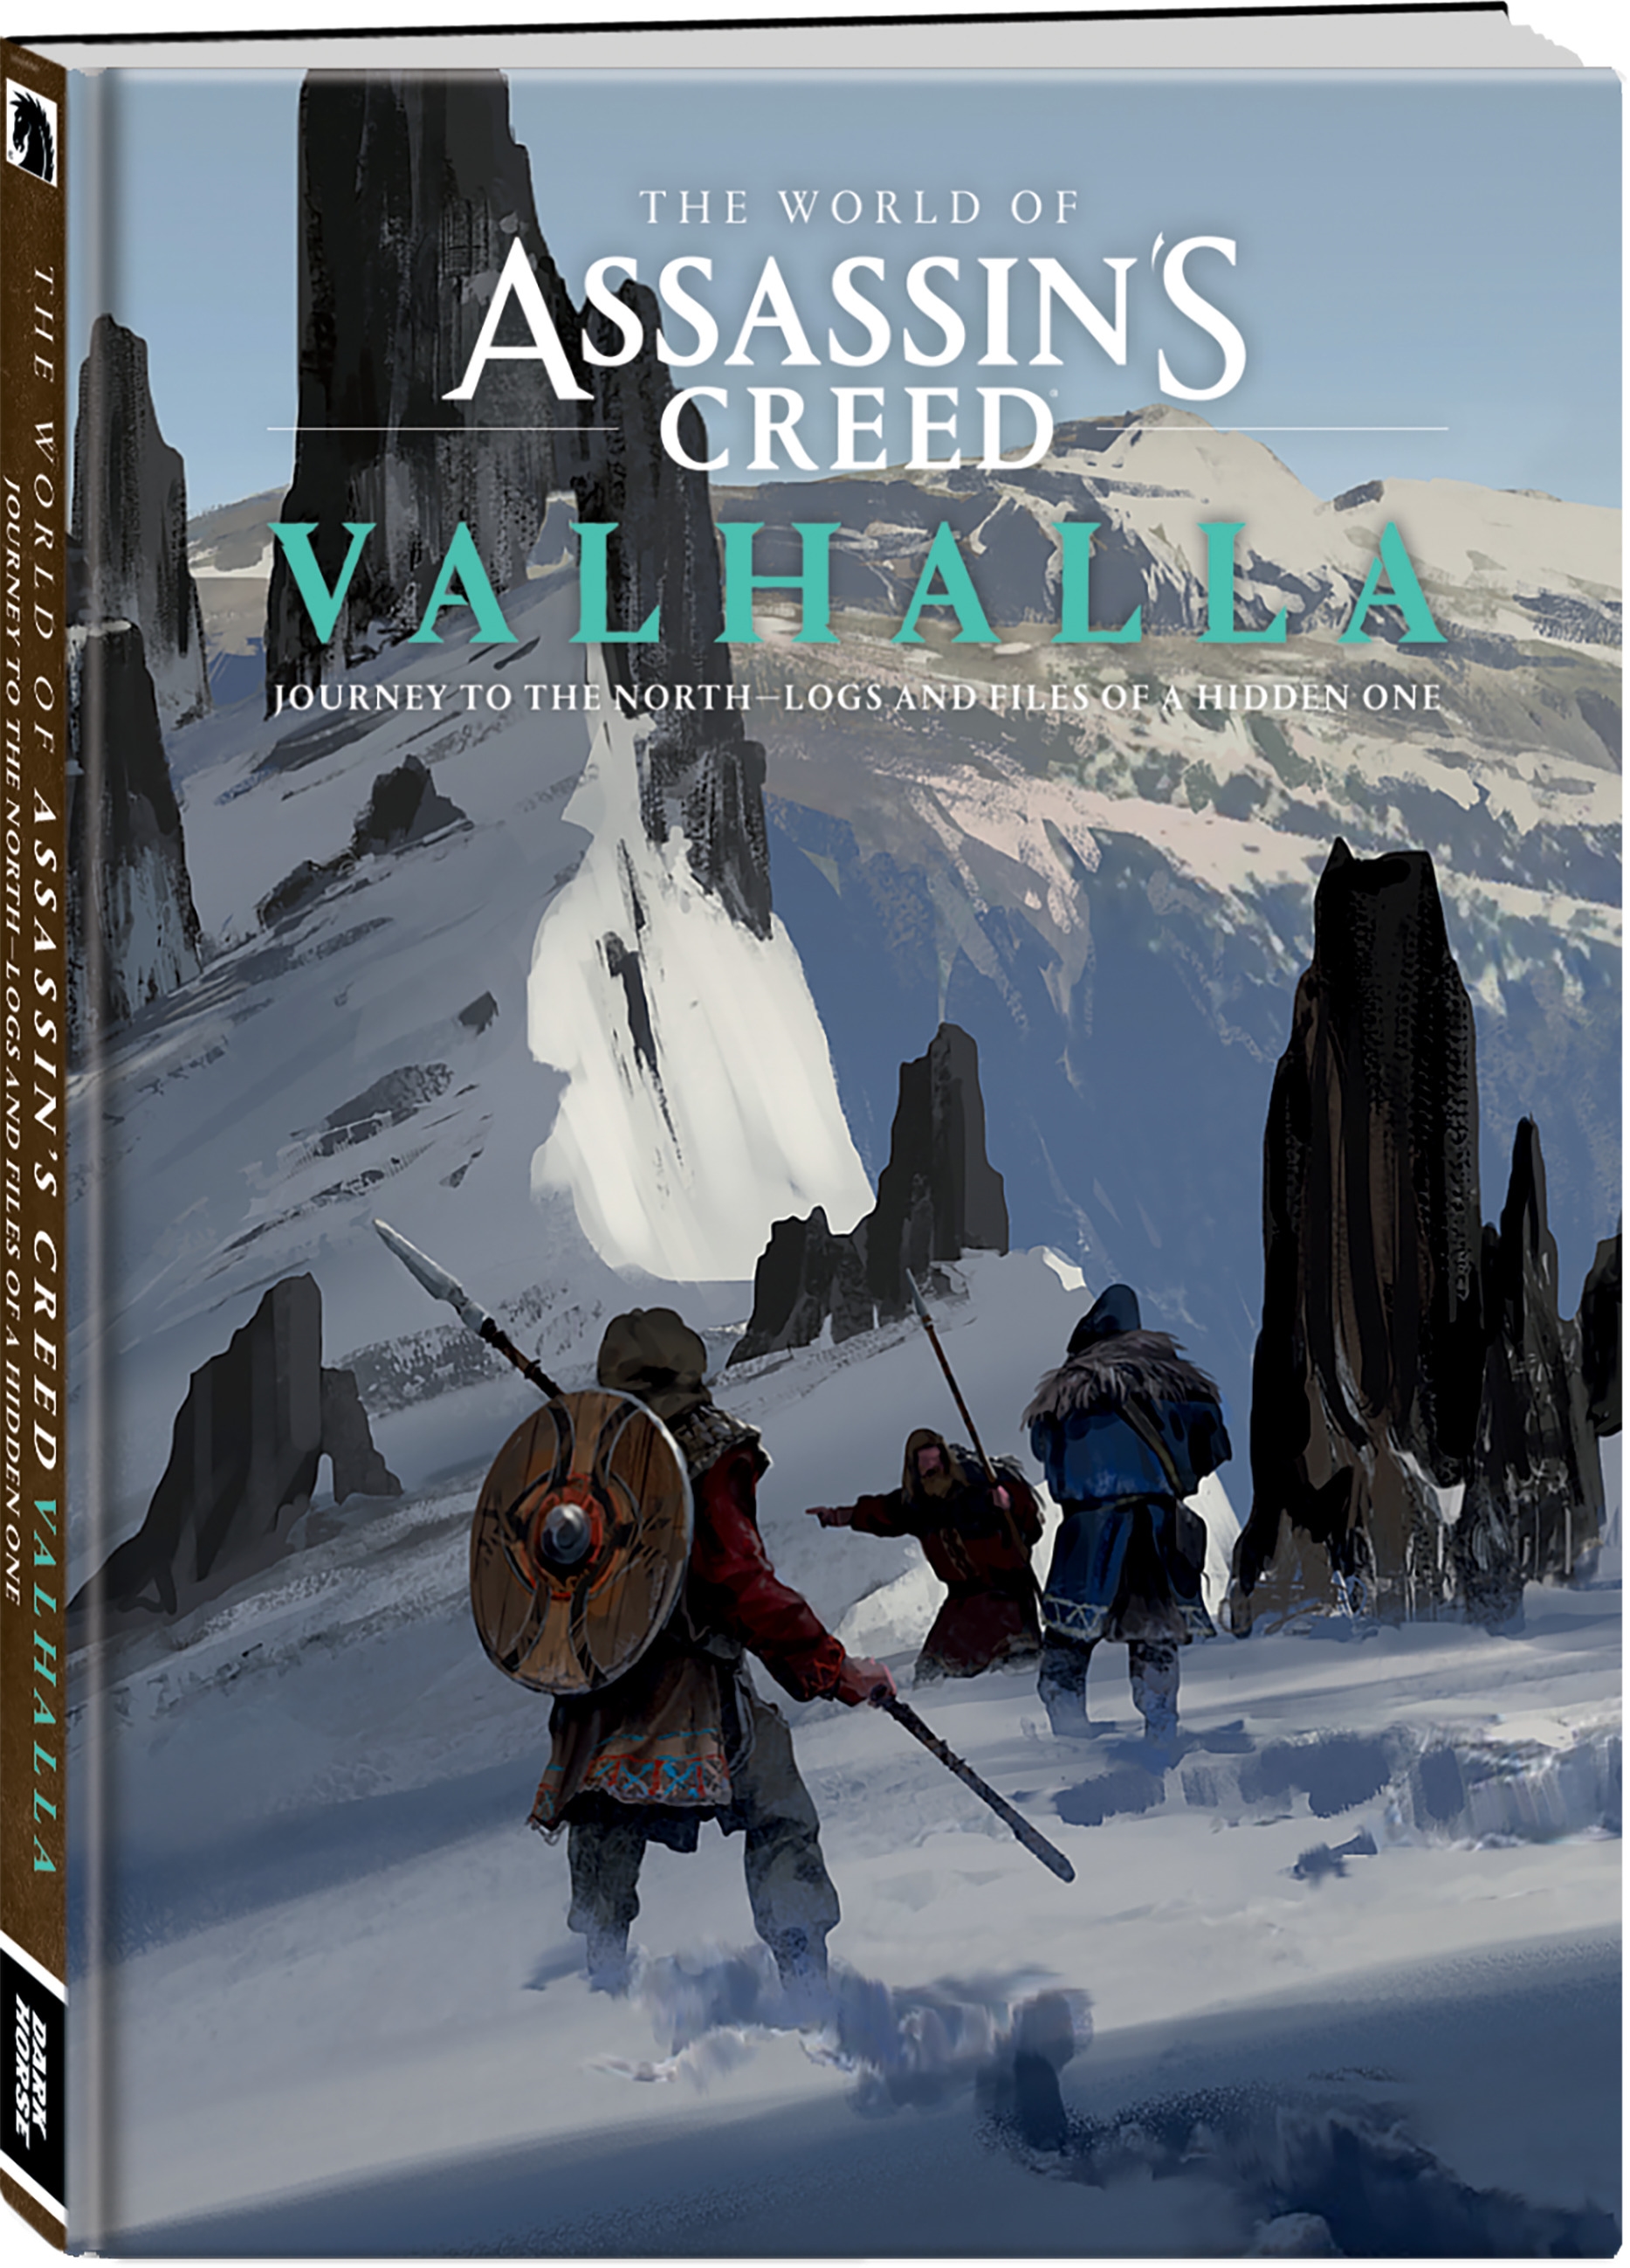 Assassin's Creed Valhalla: Forgotten Myths by Alexander M. Freed:  9781506729756 | : Books